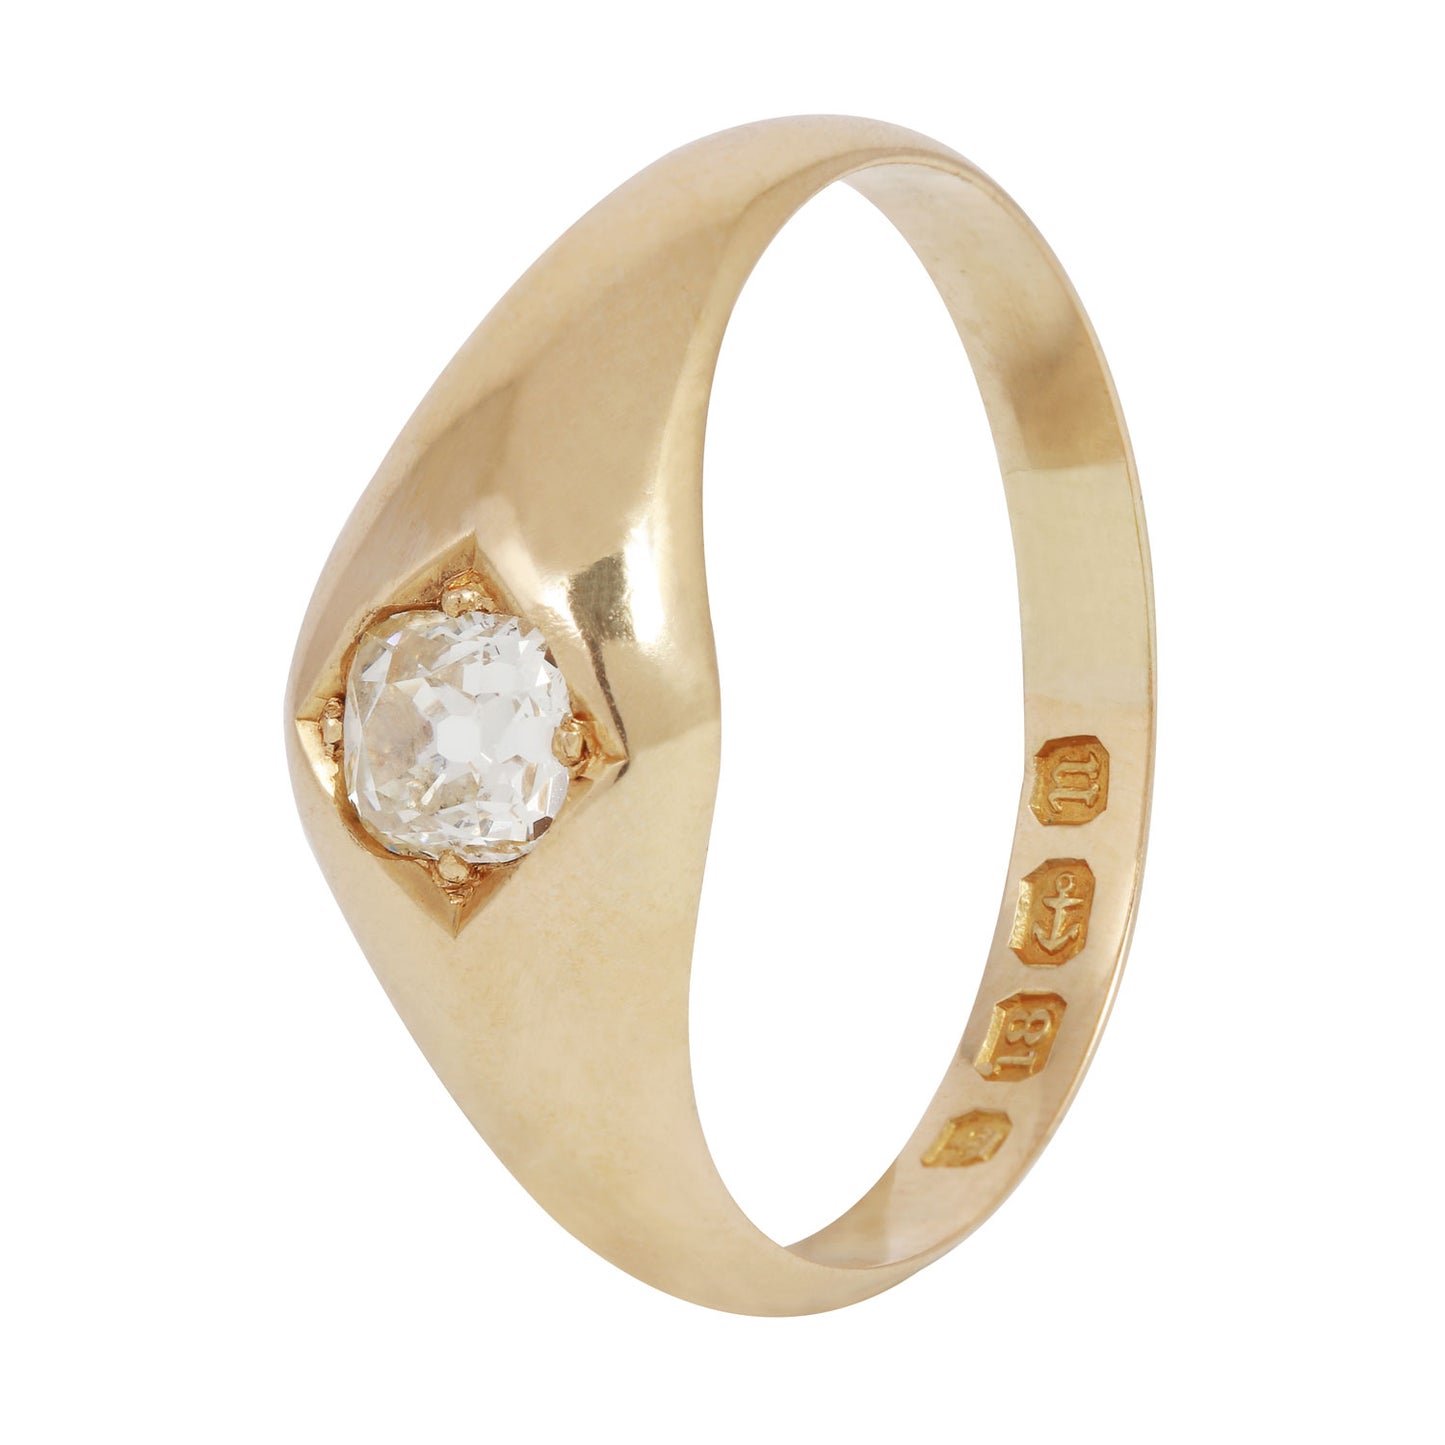 Grand Star Solitaire Ring